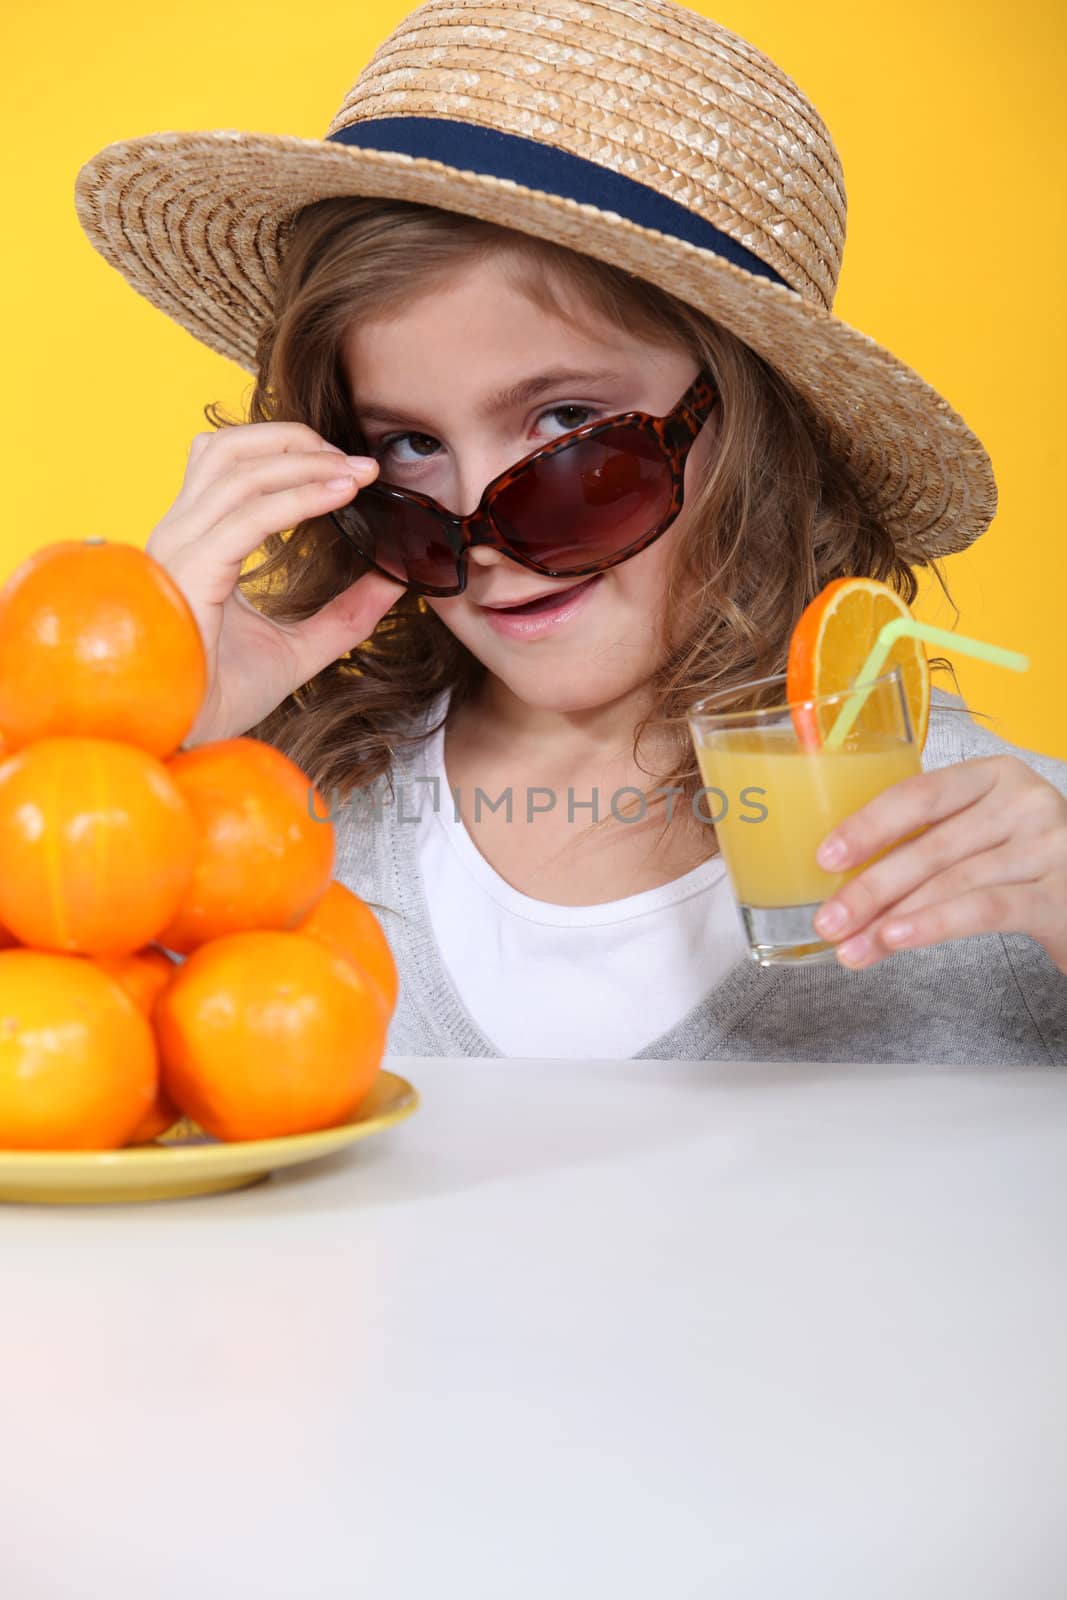 Little girl with freshly squeezed orange juice by phovoir